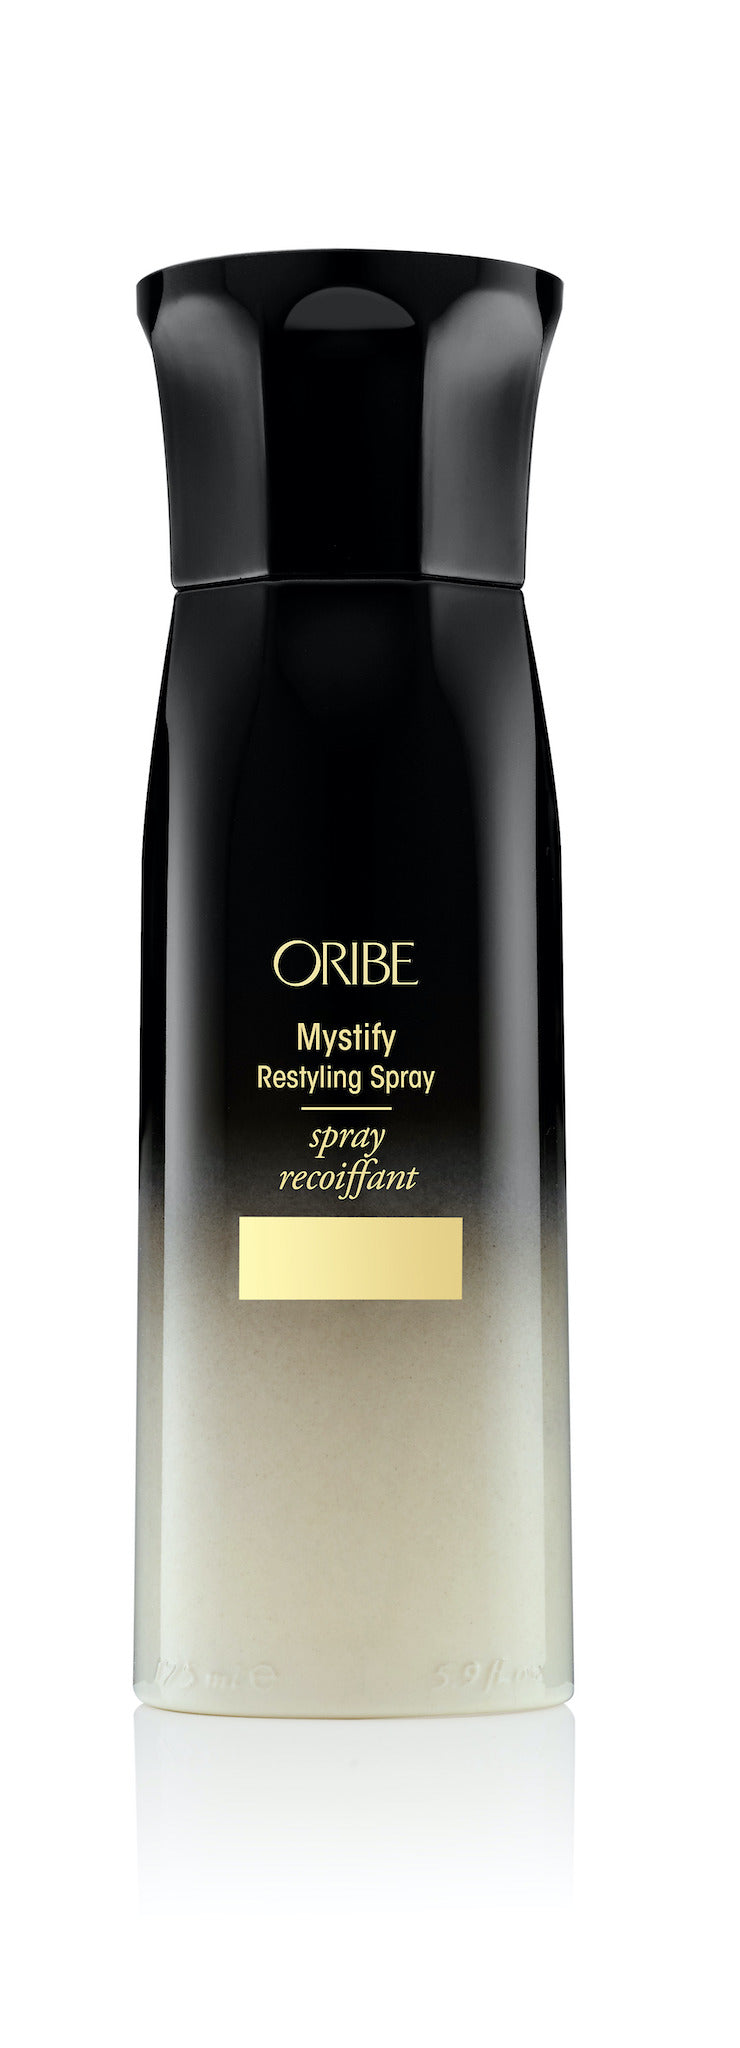 Oribe - Mystify Spray black to cream ombre with gold accents